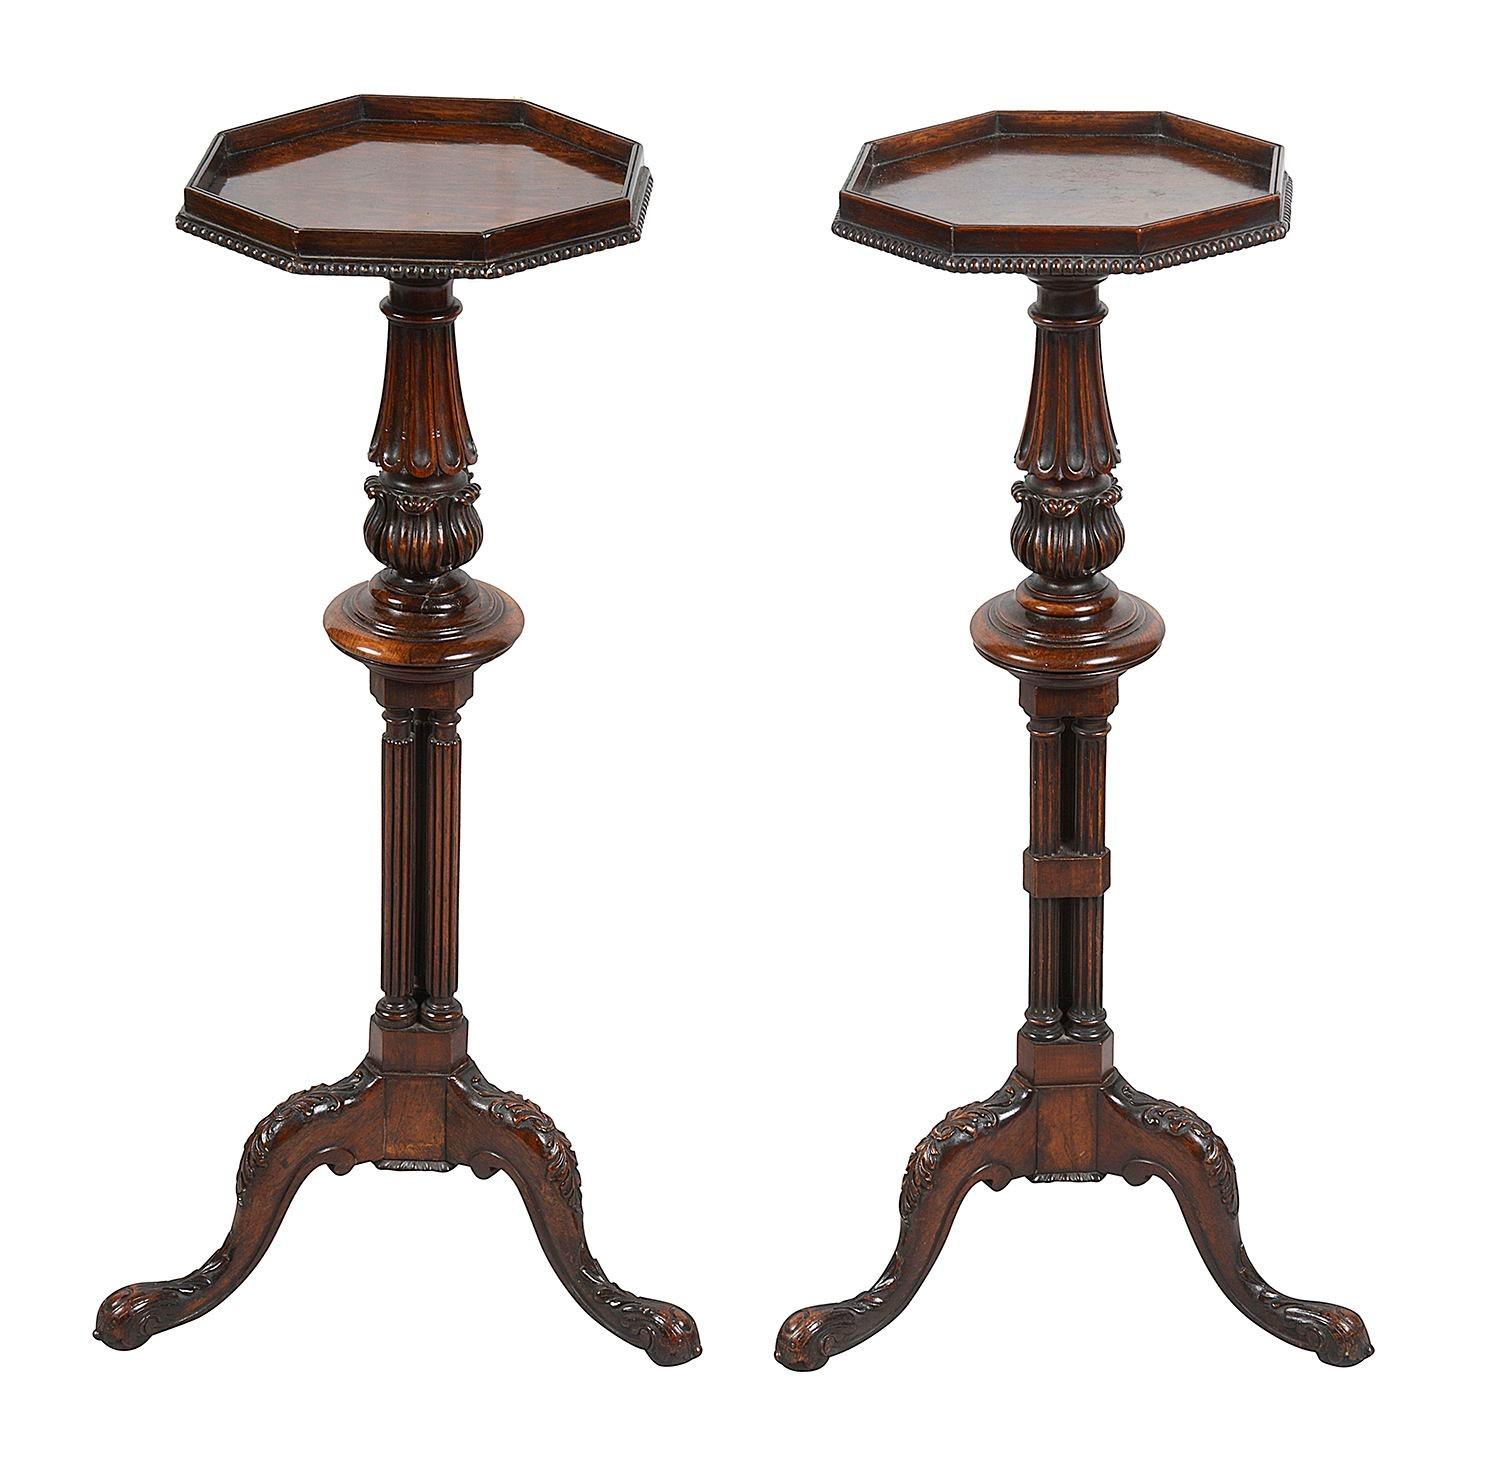 Pair late Regency period Rosewood side tables, each with a galleried hexagonal top, reeded and fluted turned, cluster columns, raised on carved tripod cabriole legs, terminating in scrolling carved feet.
Attributed to Gillow.

Batch 77 62724 SNYKZ